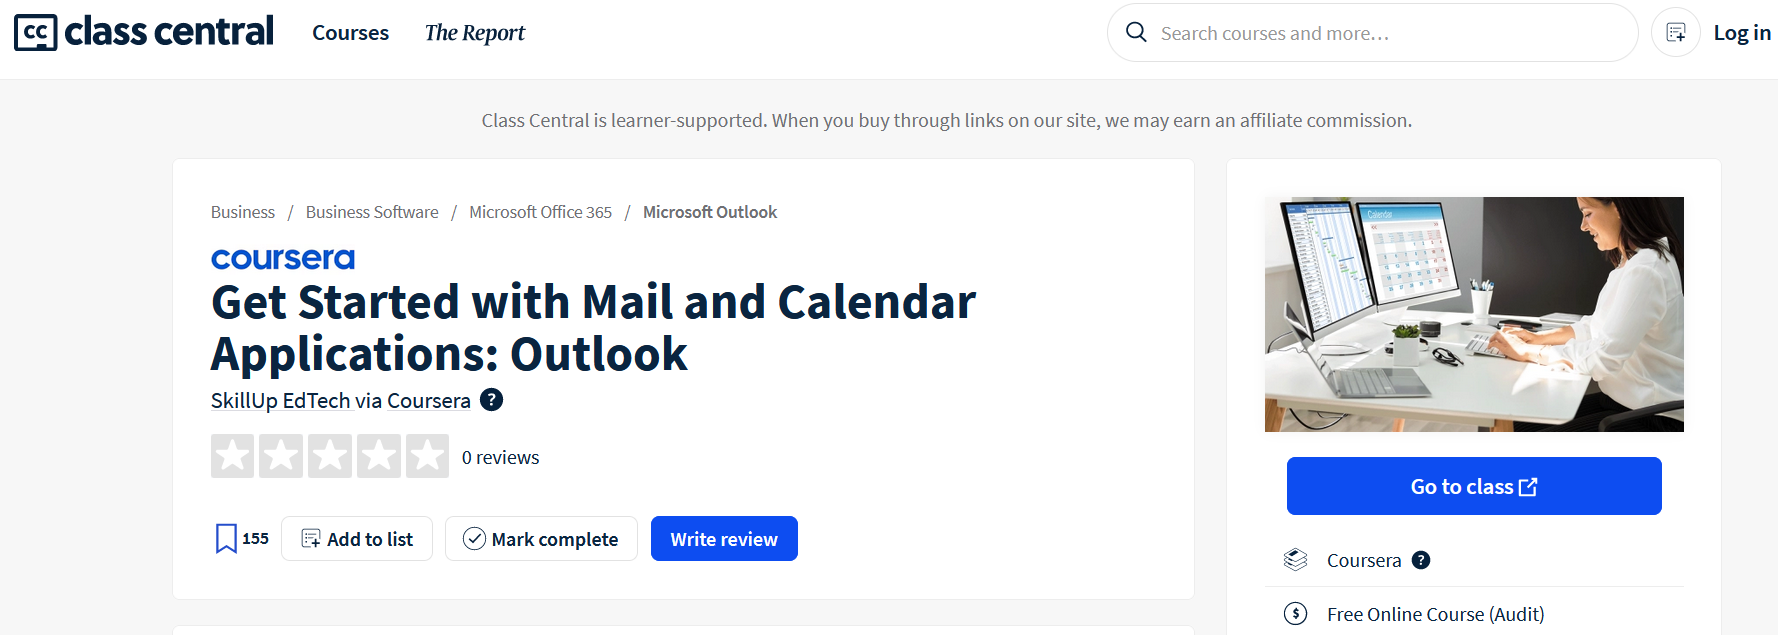 Get Started with Mail and Calendar Applications: Outlook - SkillUp EdTech via Coursera